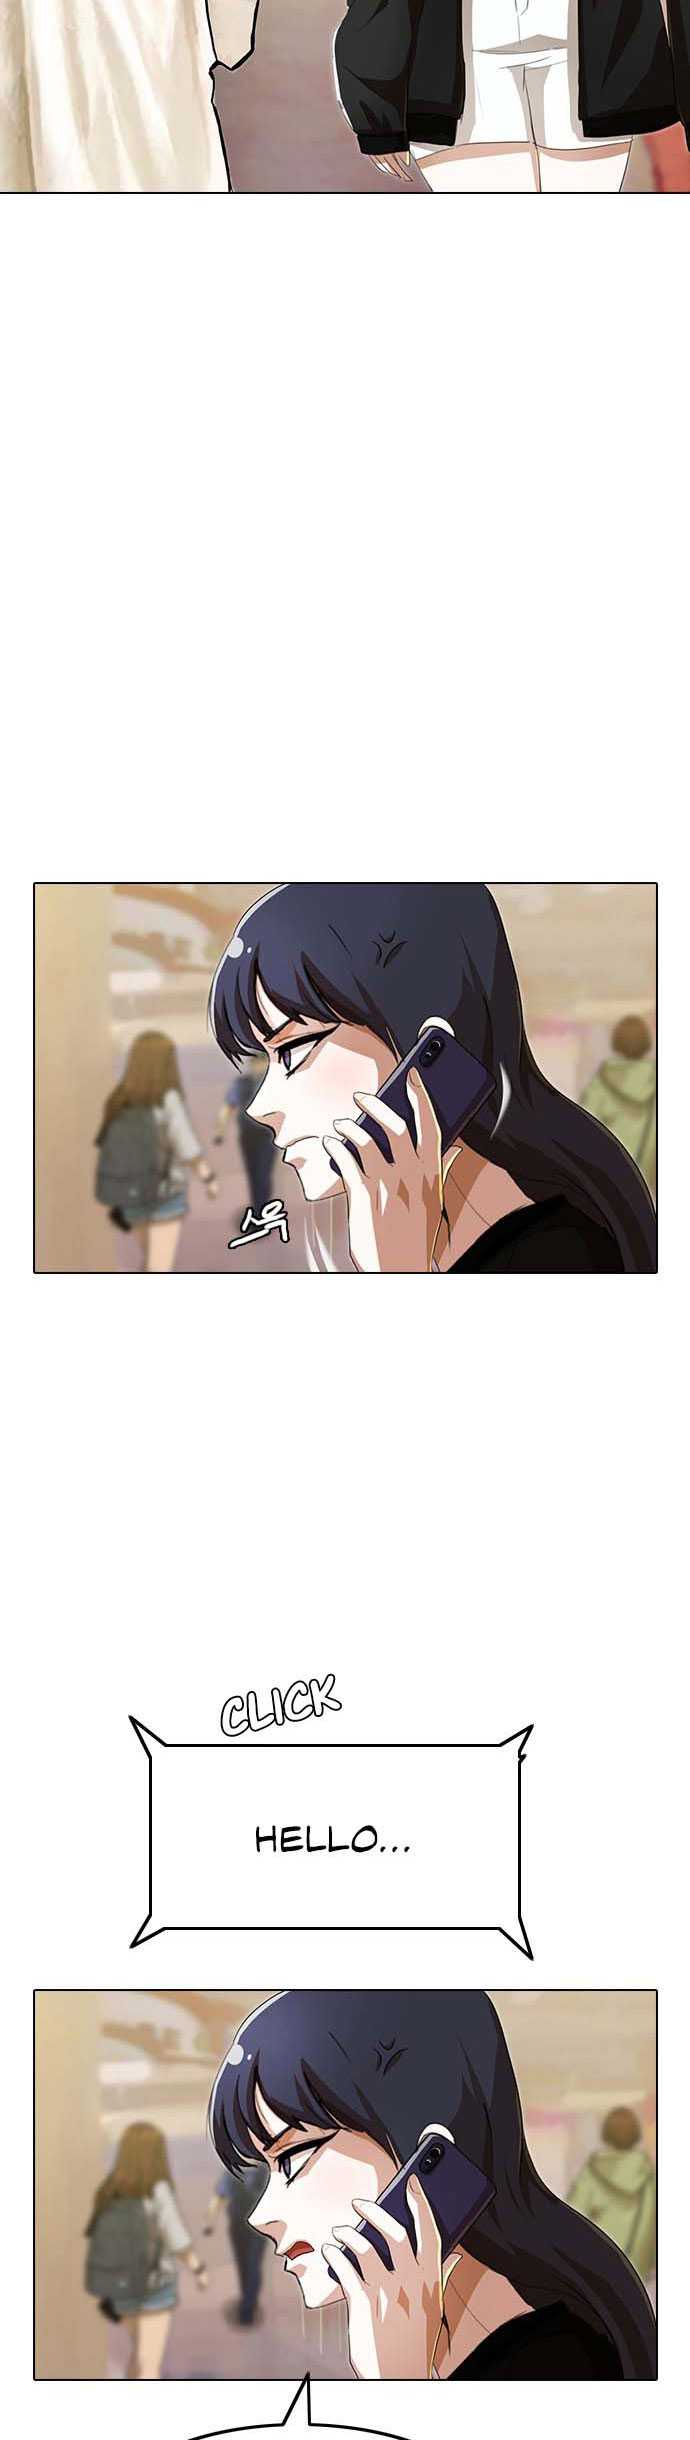 The Girl from Random Chatting! Chapter 92